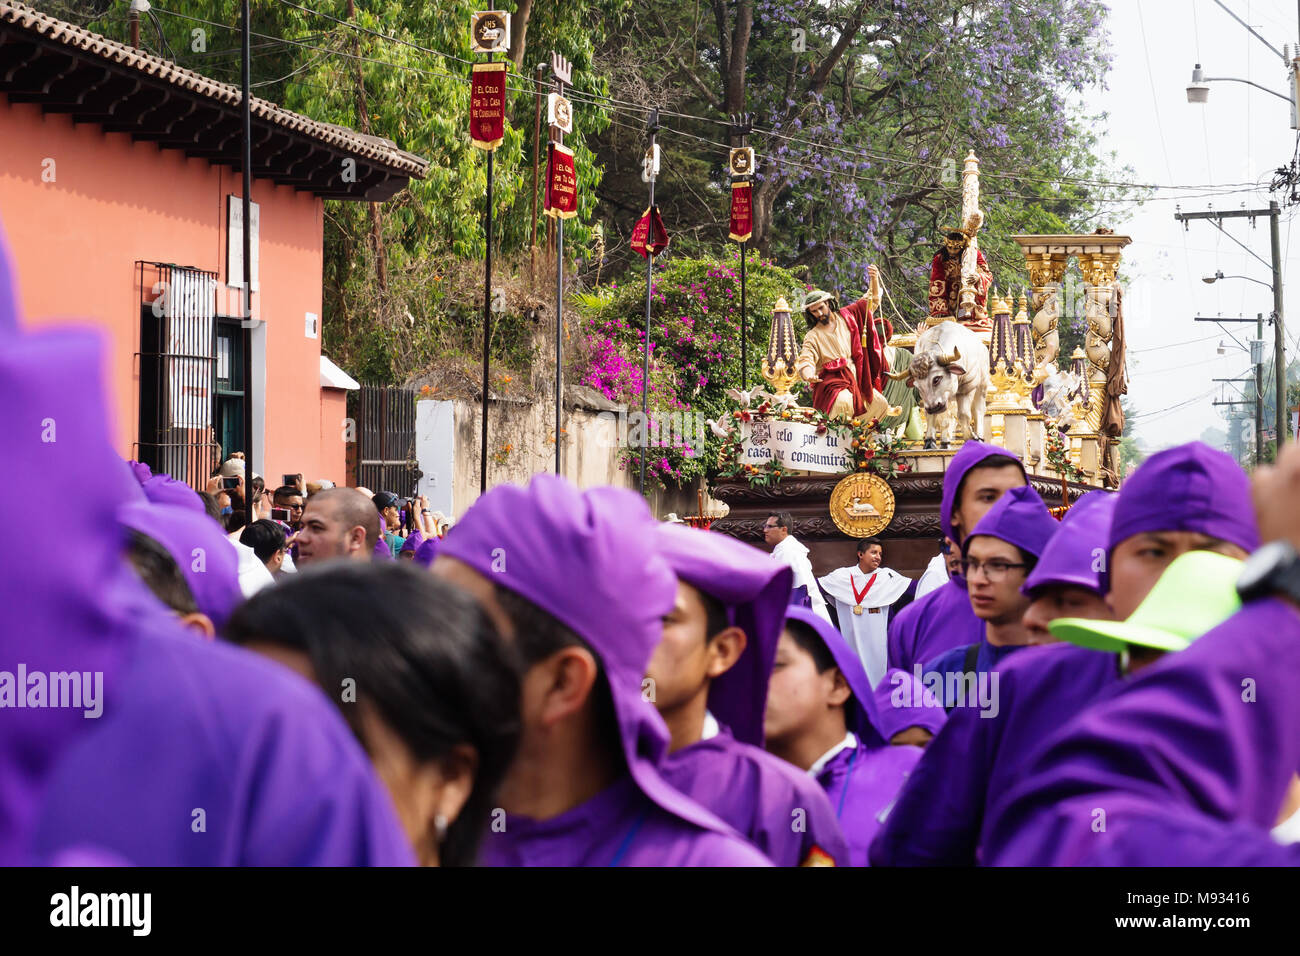 Altar boy in front of a float with Christ and a cross at the procession of San Bartolome de Becerra, Antigua, Guatemala Stock Photo